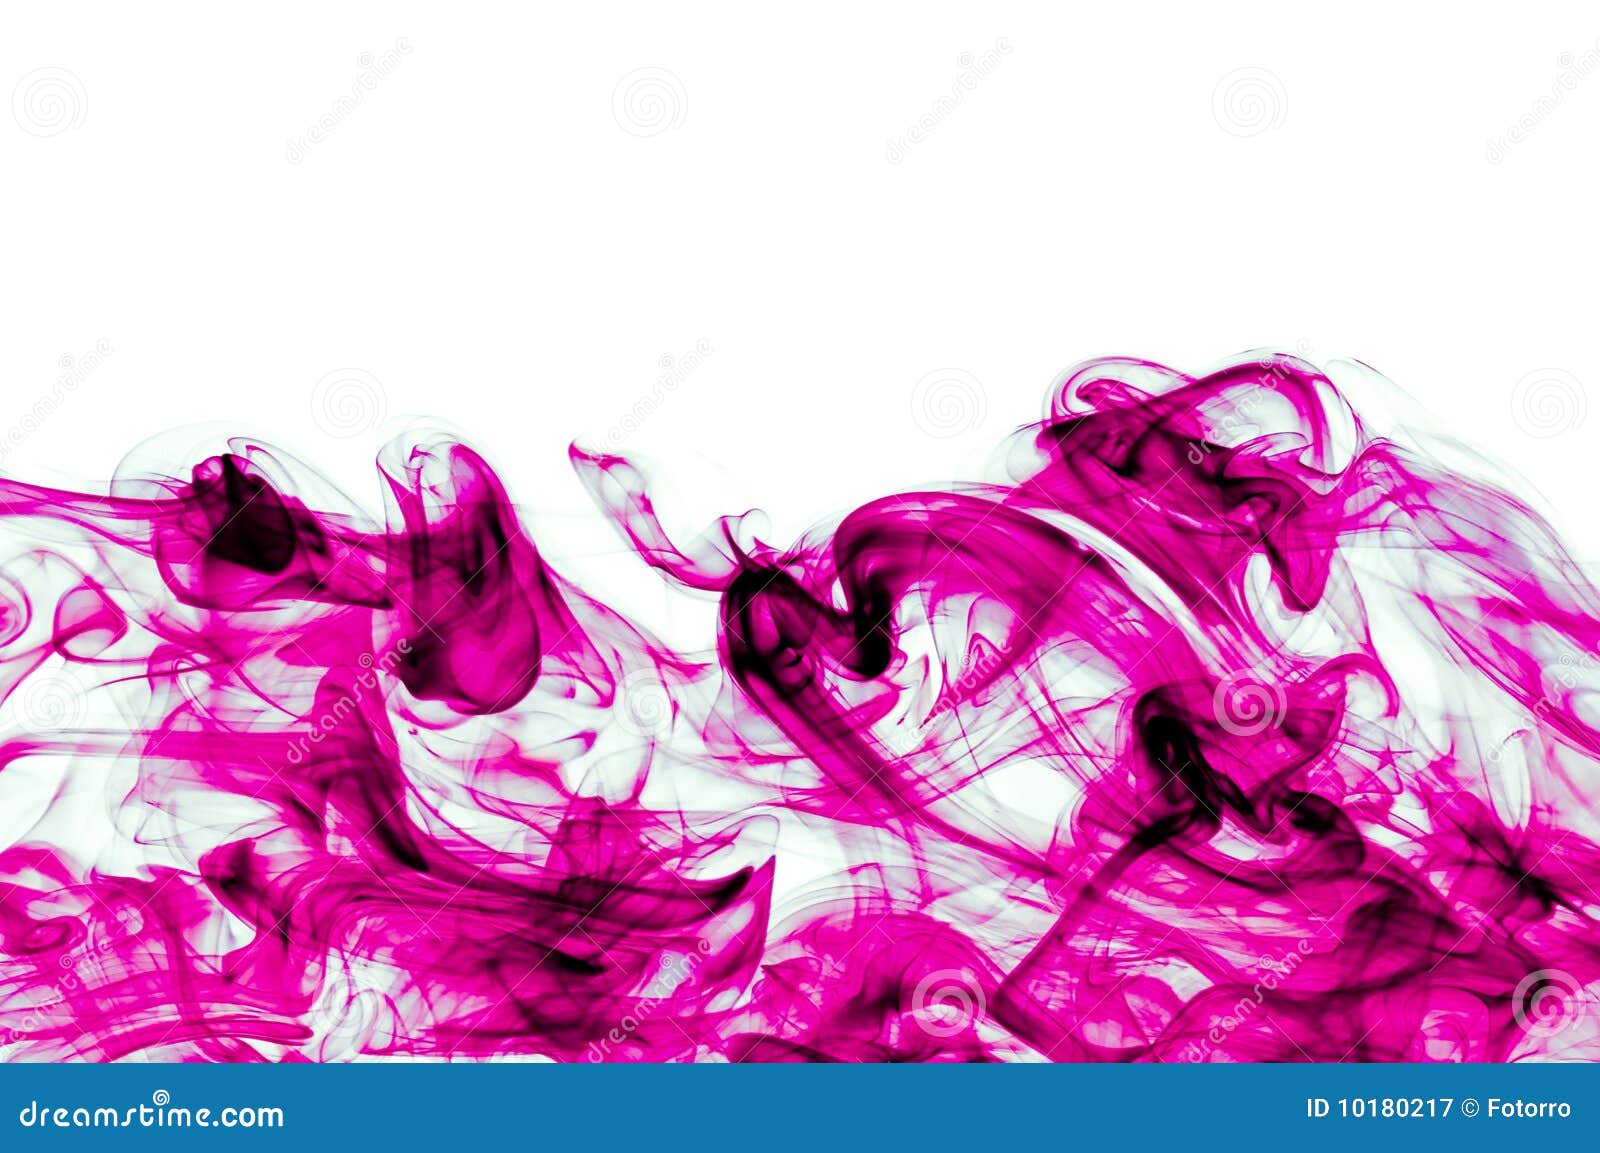 abstract purple (magenta) and white background